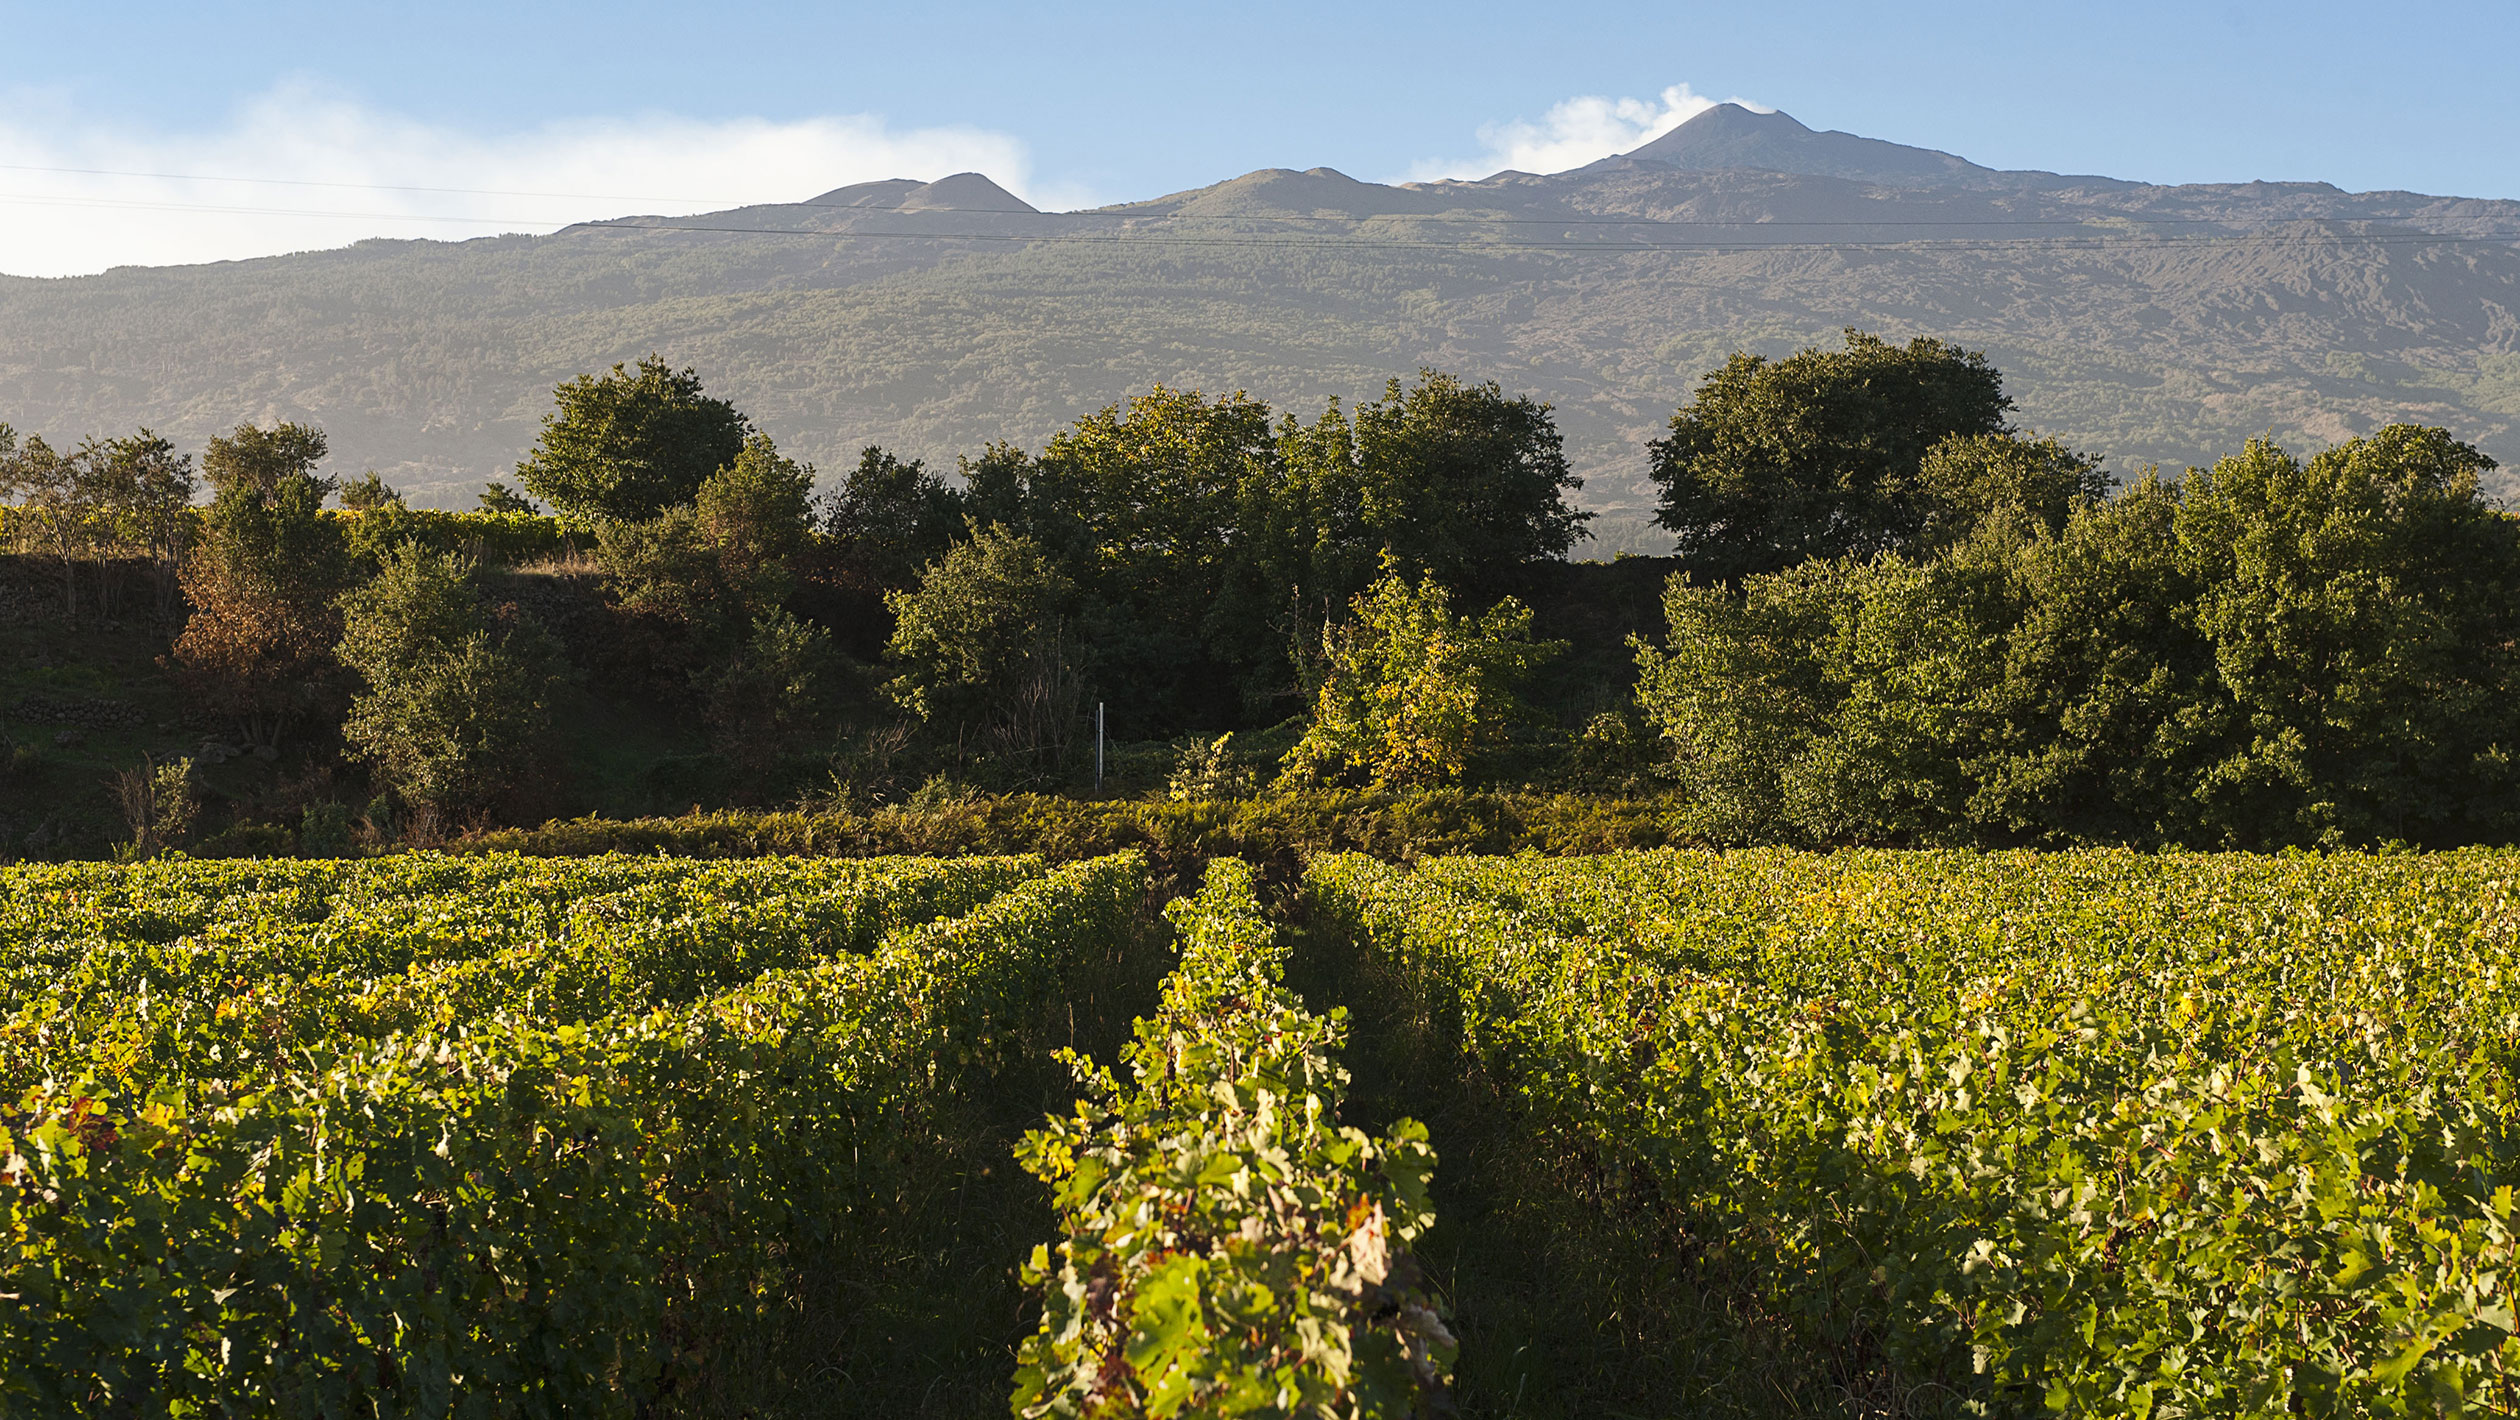 Landscape photo of an Etna vineyard, mountains in the background